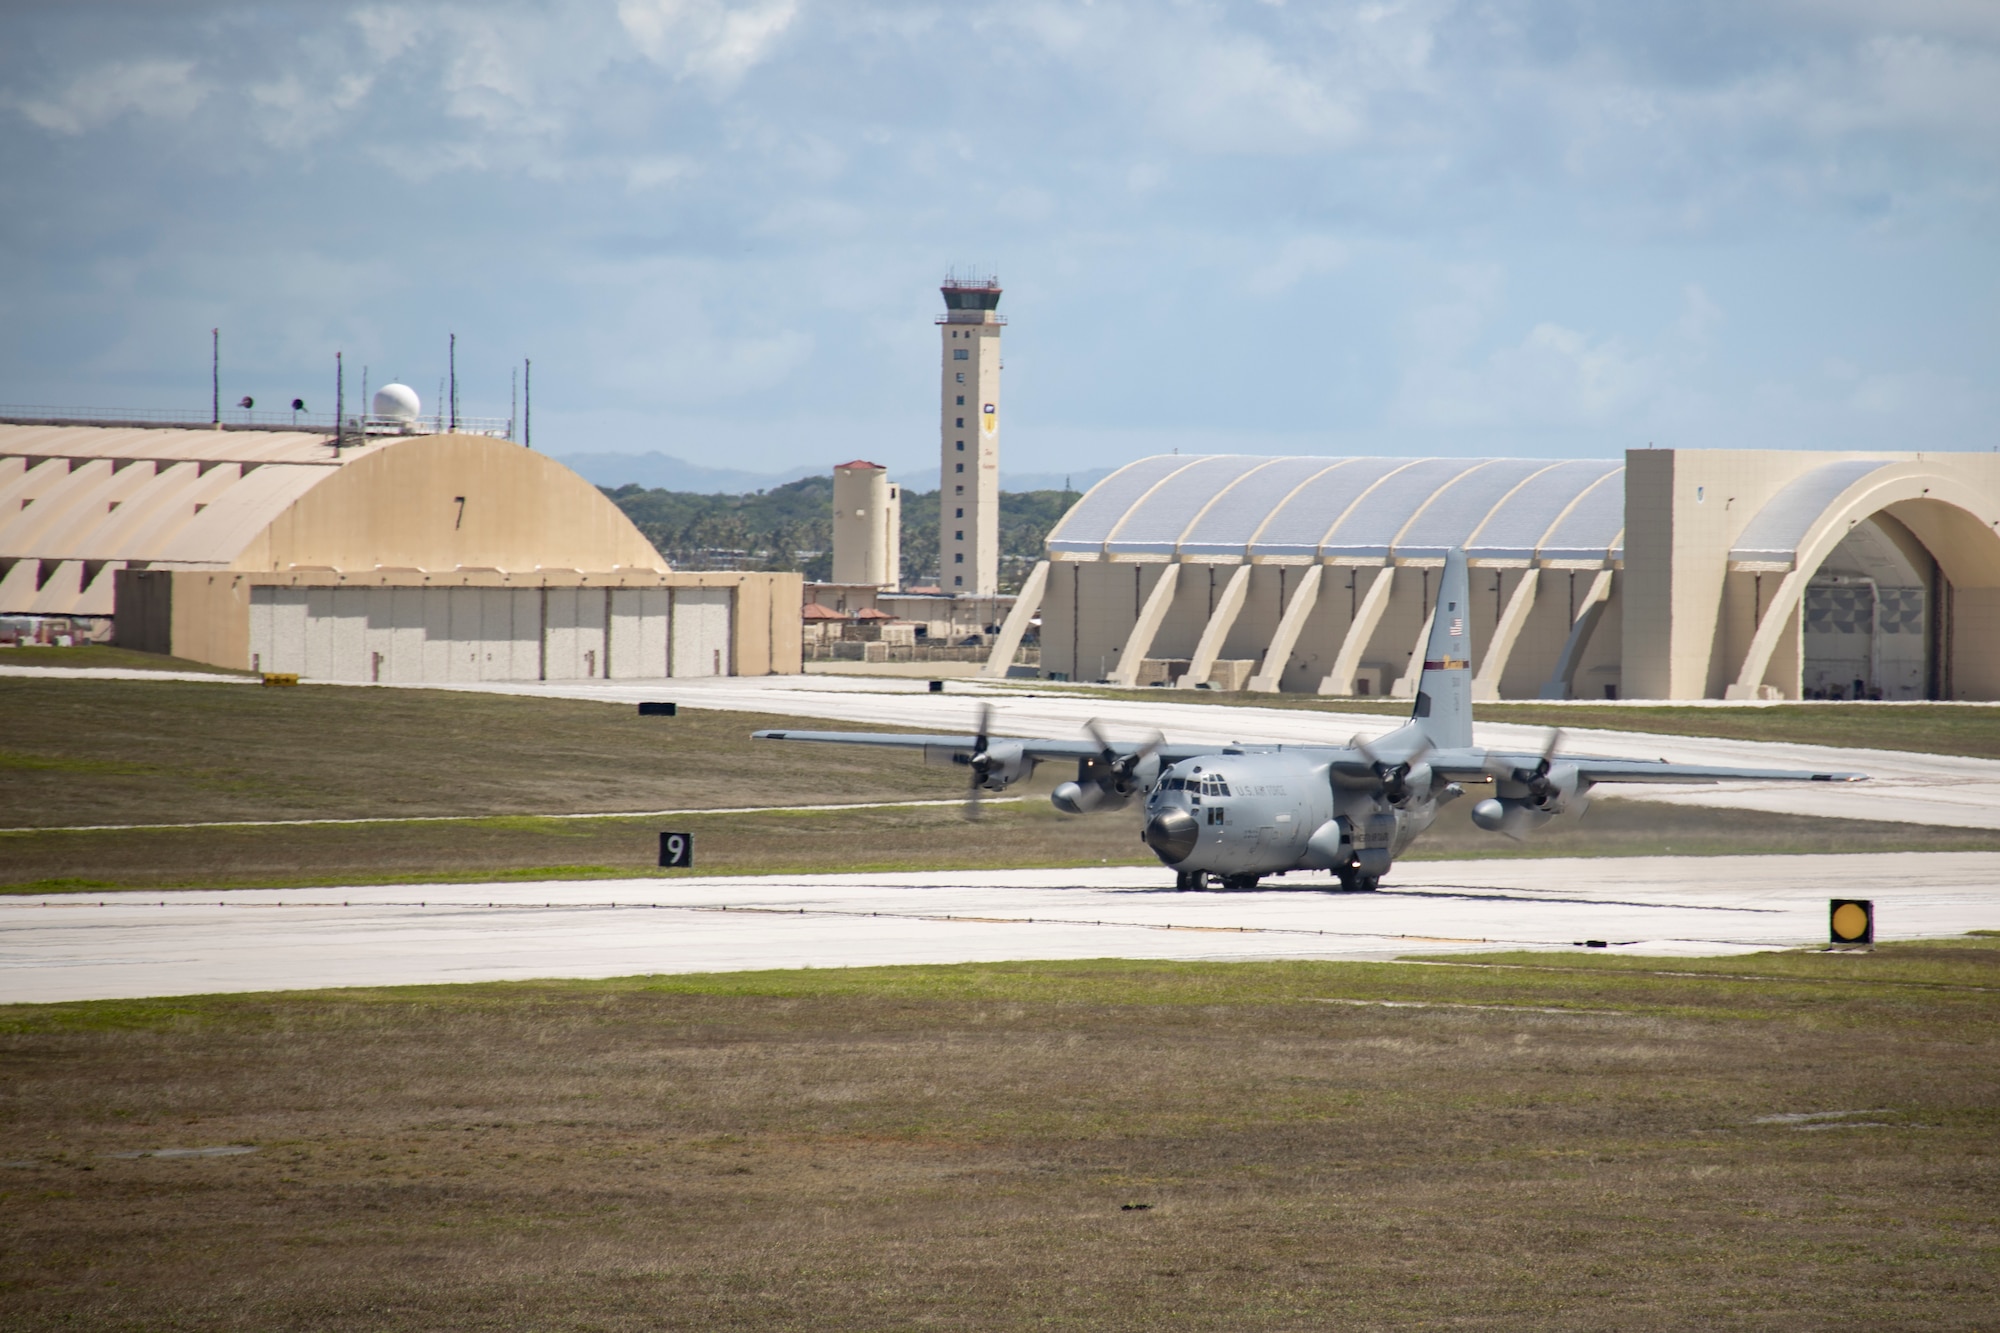 A U.S. Air Force C130 Hercules assigned to Air National Guard, 133rd Airlift Wing, St. Paul, Minnesota, arrives at Andersen Air Force Base, Guam, June 7, 2022. The Air National Guard assisted in transporting a U.S. Marine Corps High-Mobility Artillery Rocket System in support of exercise Valiant Shield 2022.